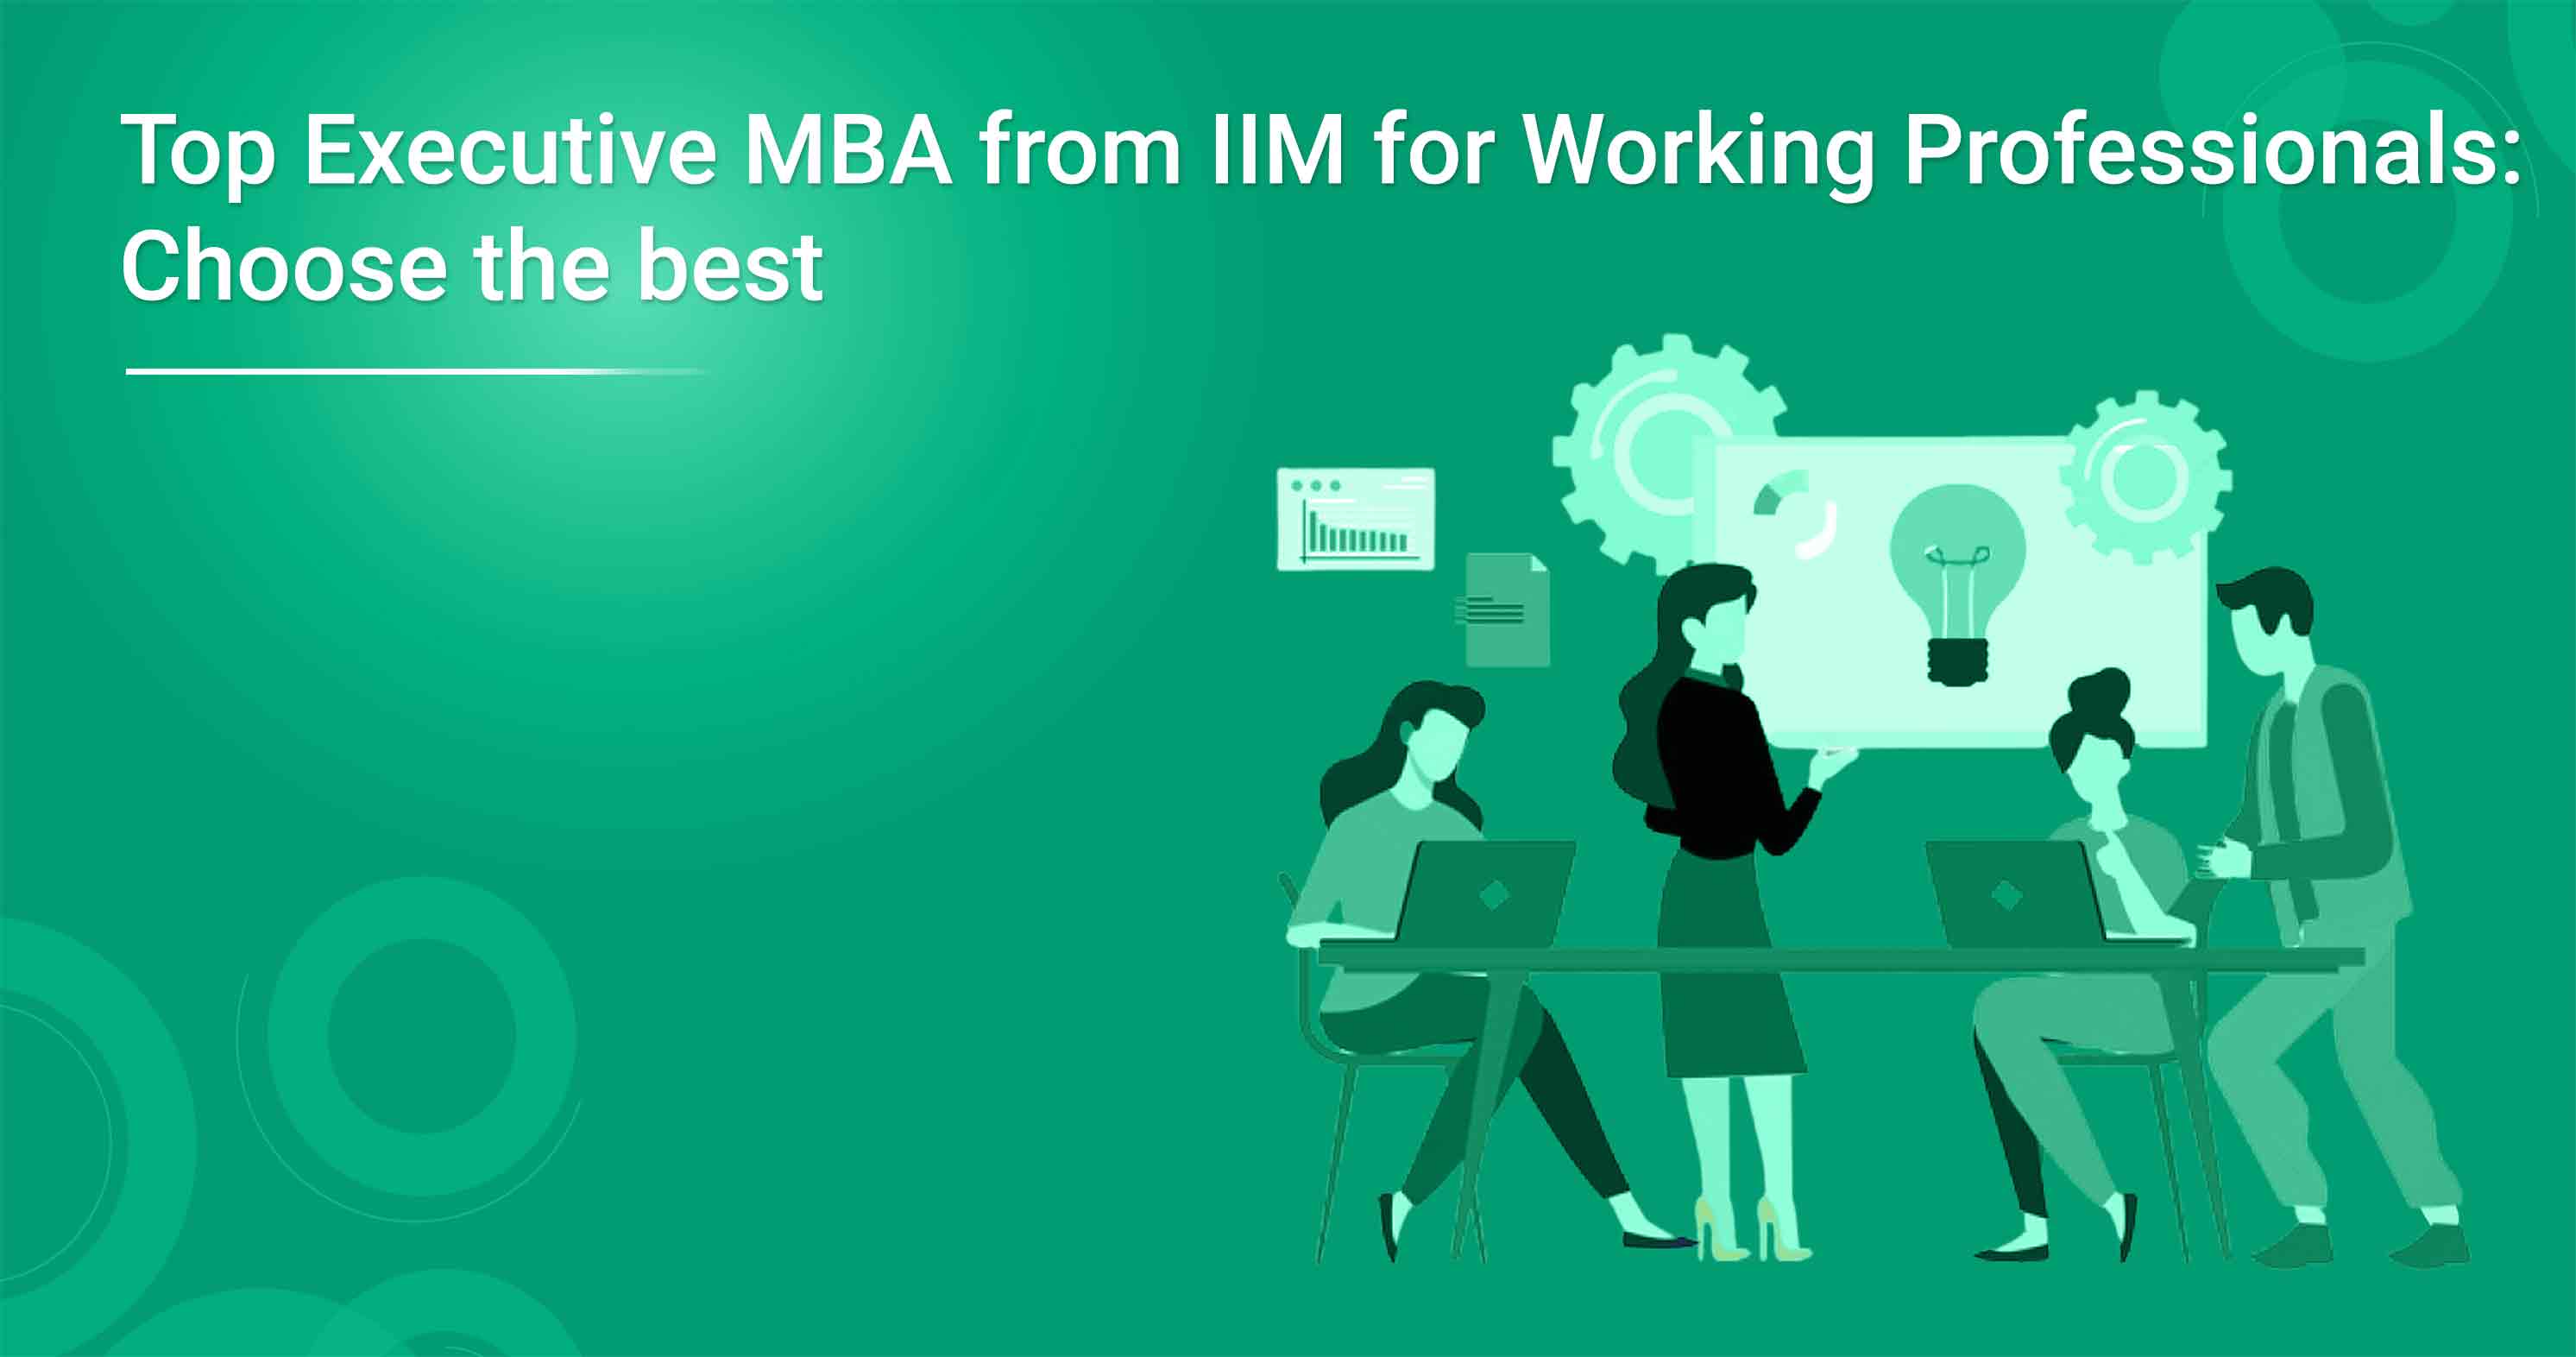 Top Executive MBA from IIM for Working Professionals: Choose the best